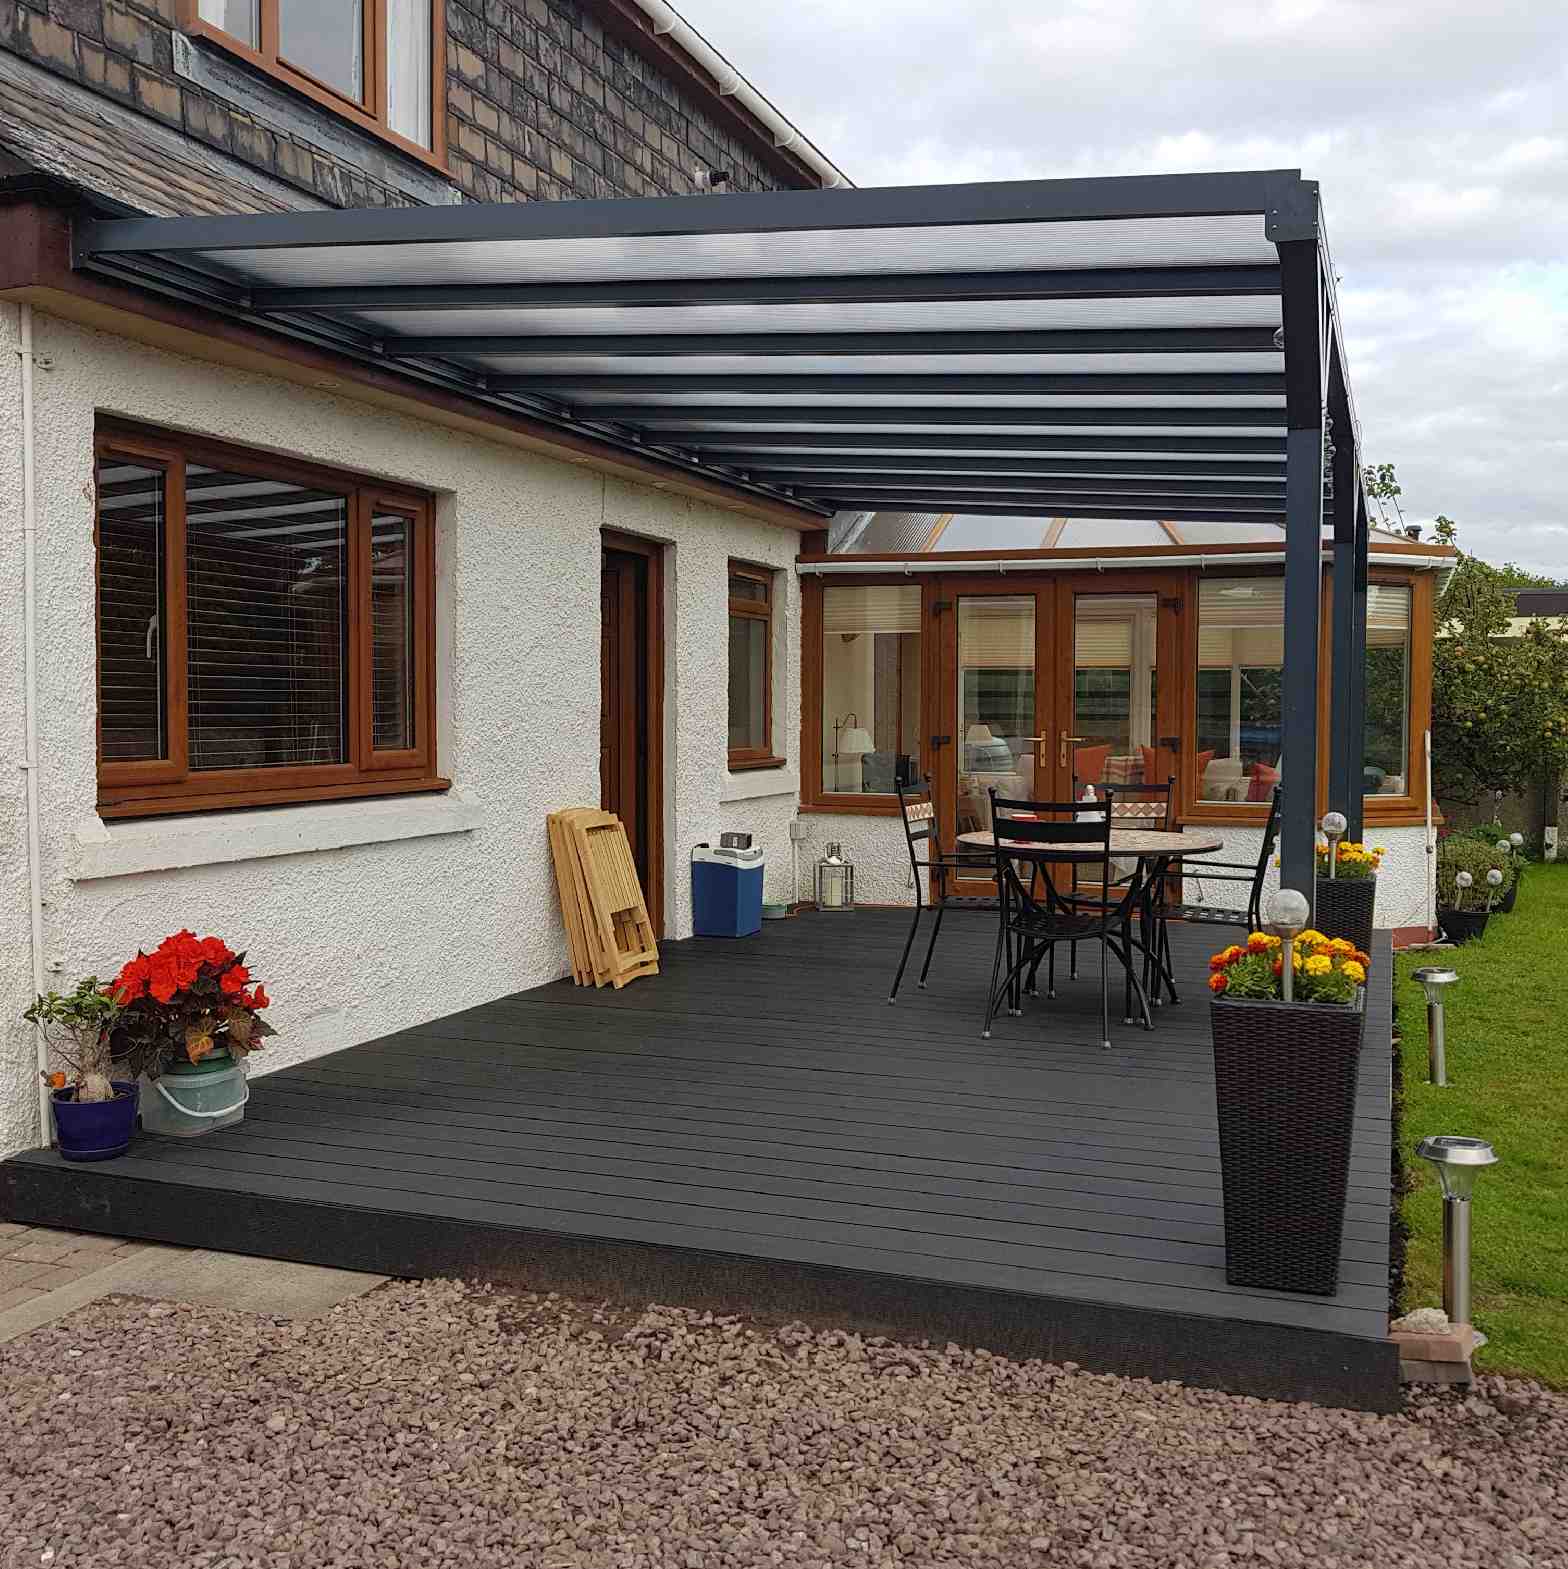 Buy Omega Verandah, Anthracite Grey, 16mm Polycarbonate Glazing - 4.2m (W) x 4.5m (P), (3) Supporting Posts online today